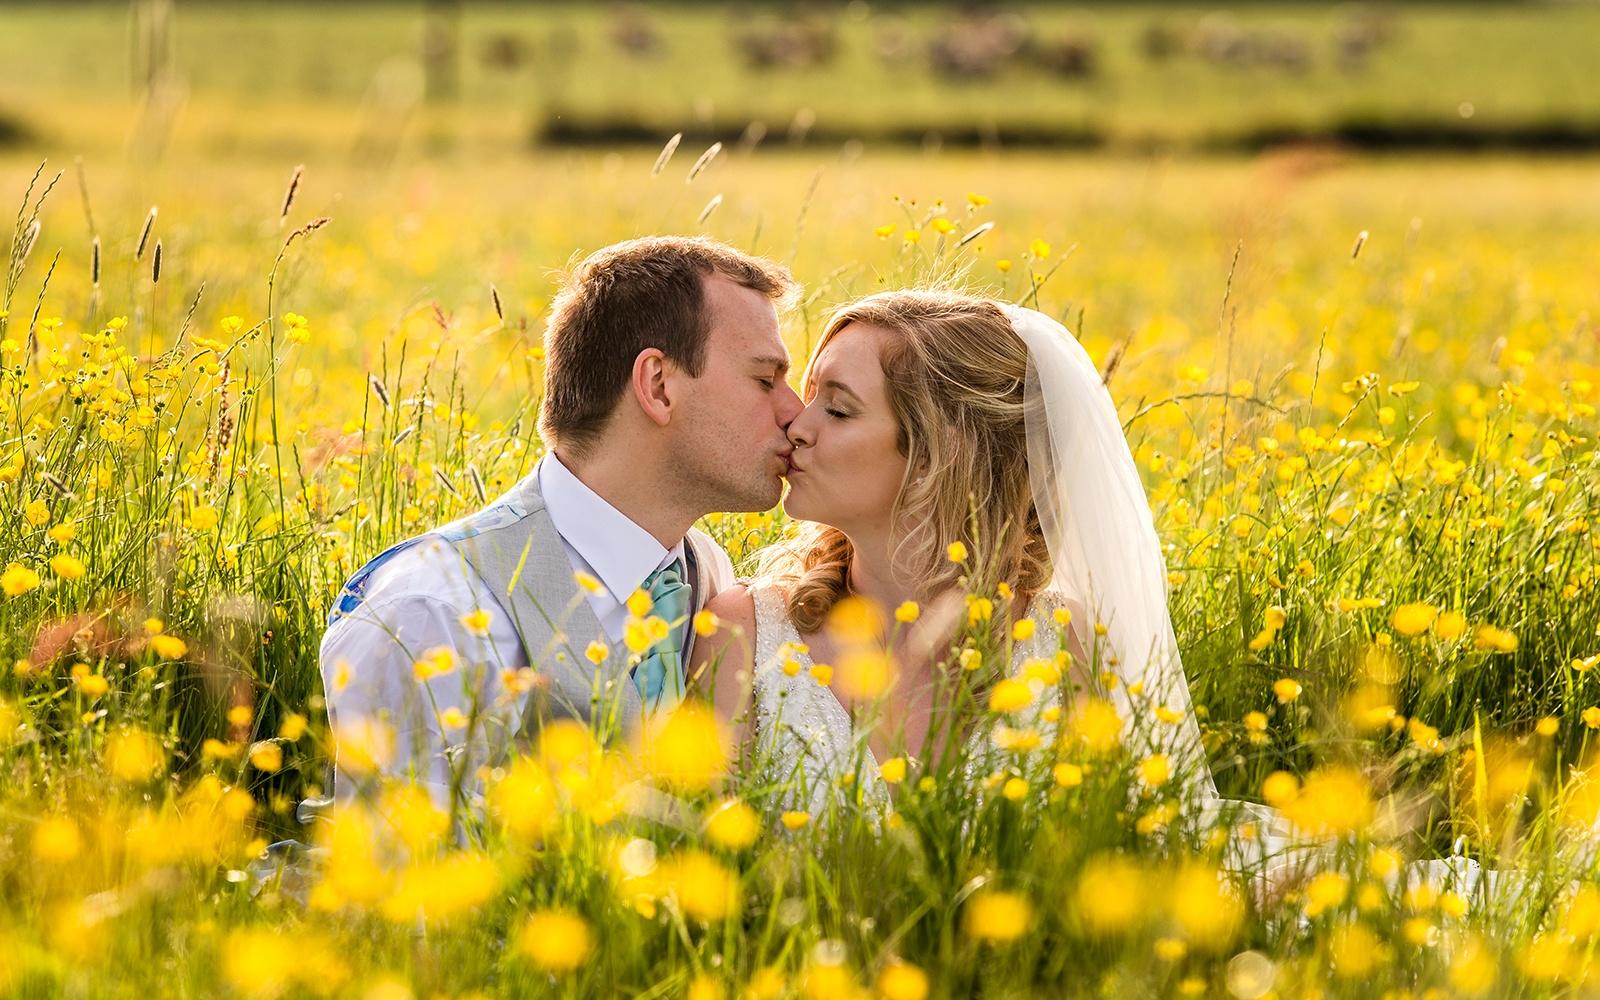 Capture Every Moment real wedding photography duo photographer Cirencester  Church of St Mary The Virgin Bampton Spittleborough Farm Wiltshire corn fields 